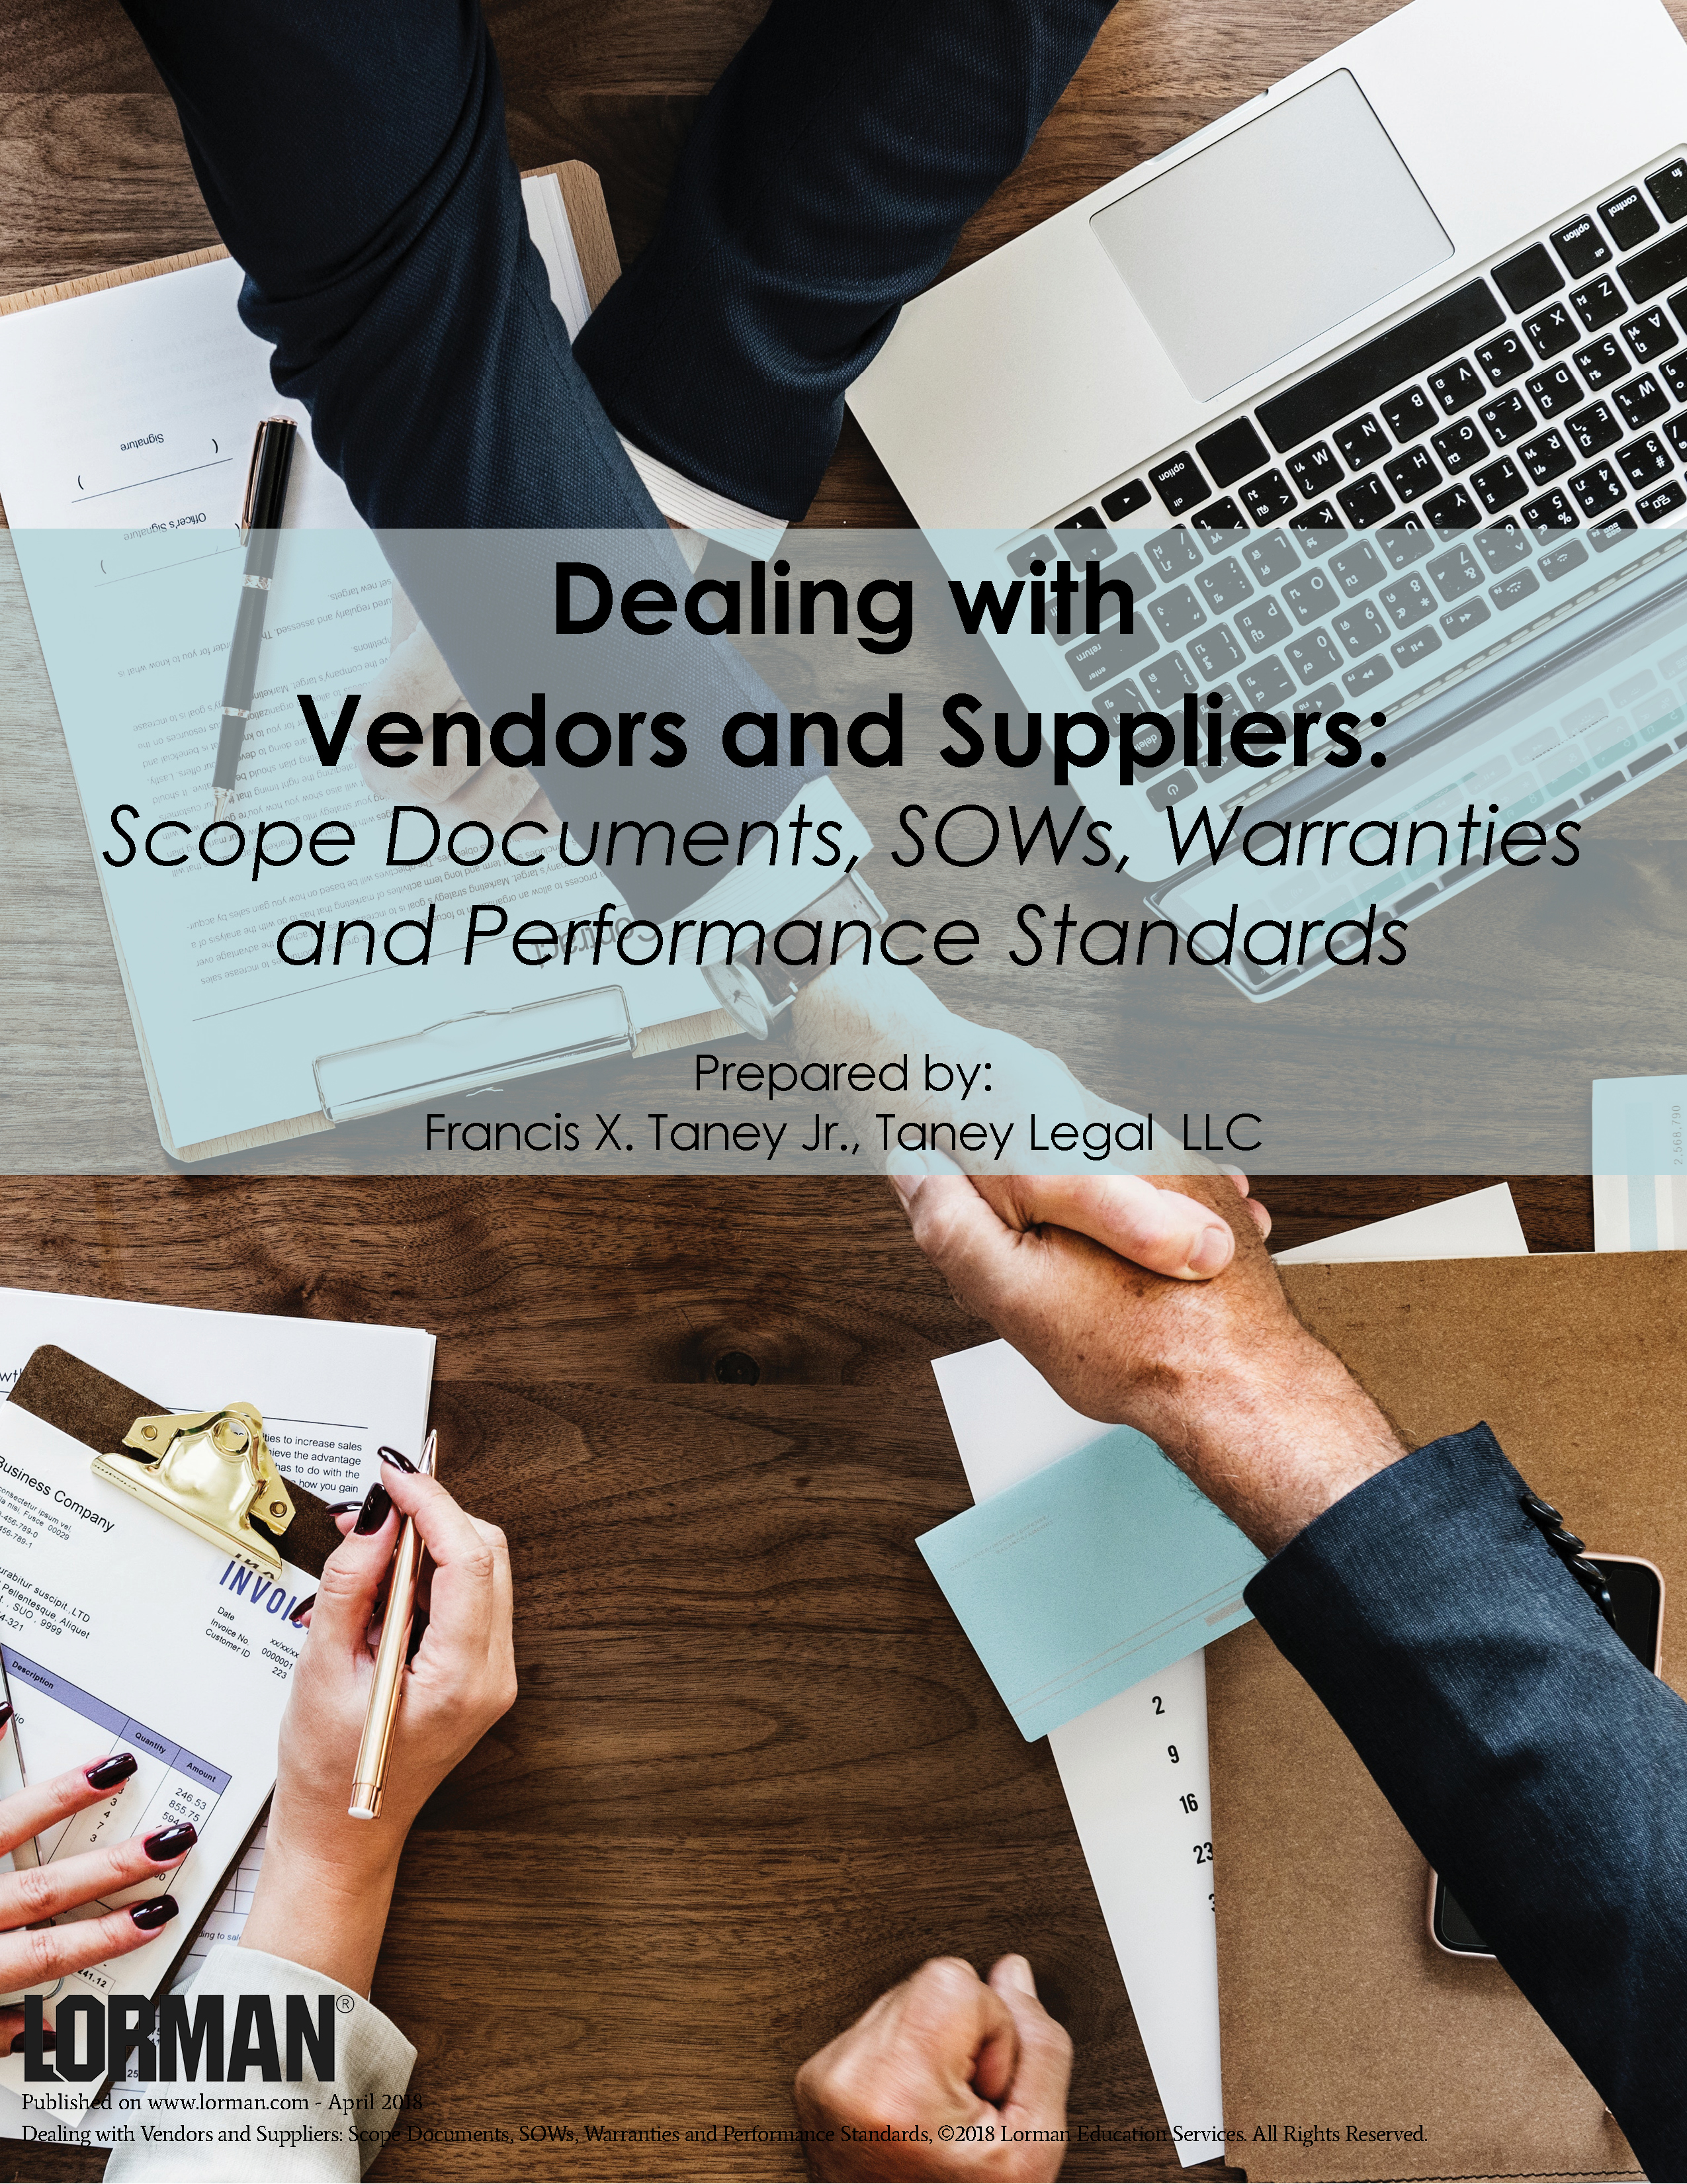 Dealing with Vendors and Suppliers - Scope Documents, SOWs, Warranties and Performance Standards